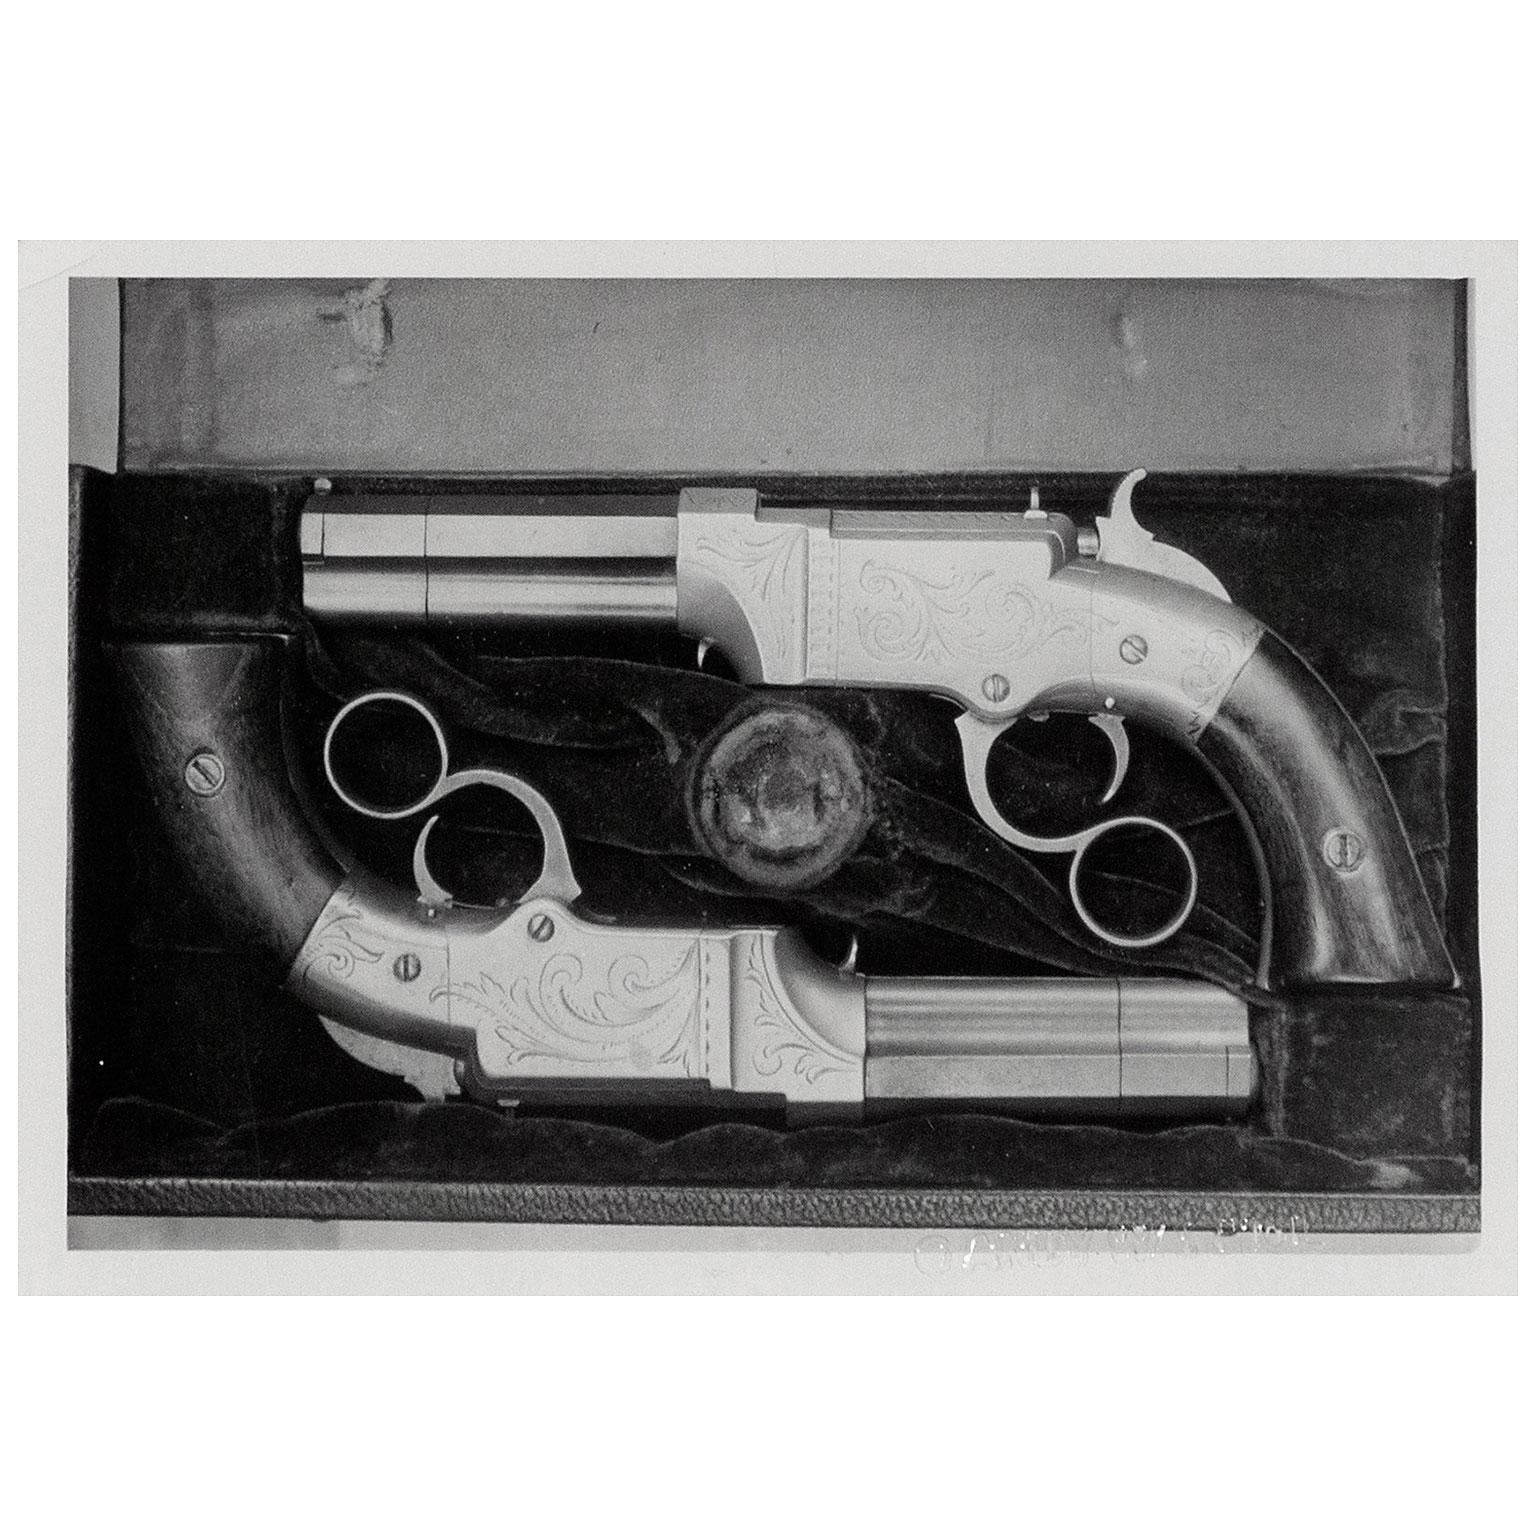 Pocket Pistols - Contemporary Photograph by Andy Warhol